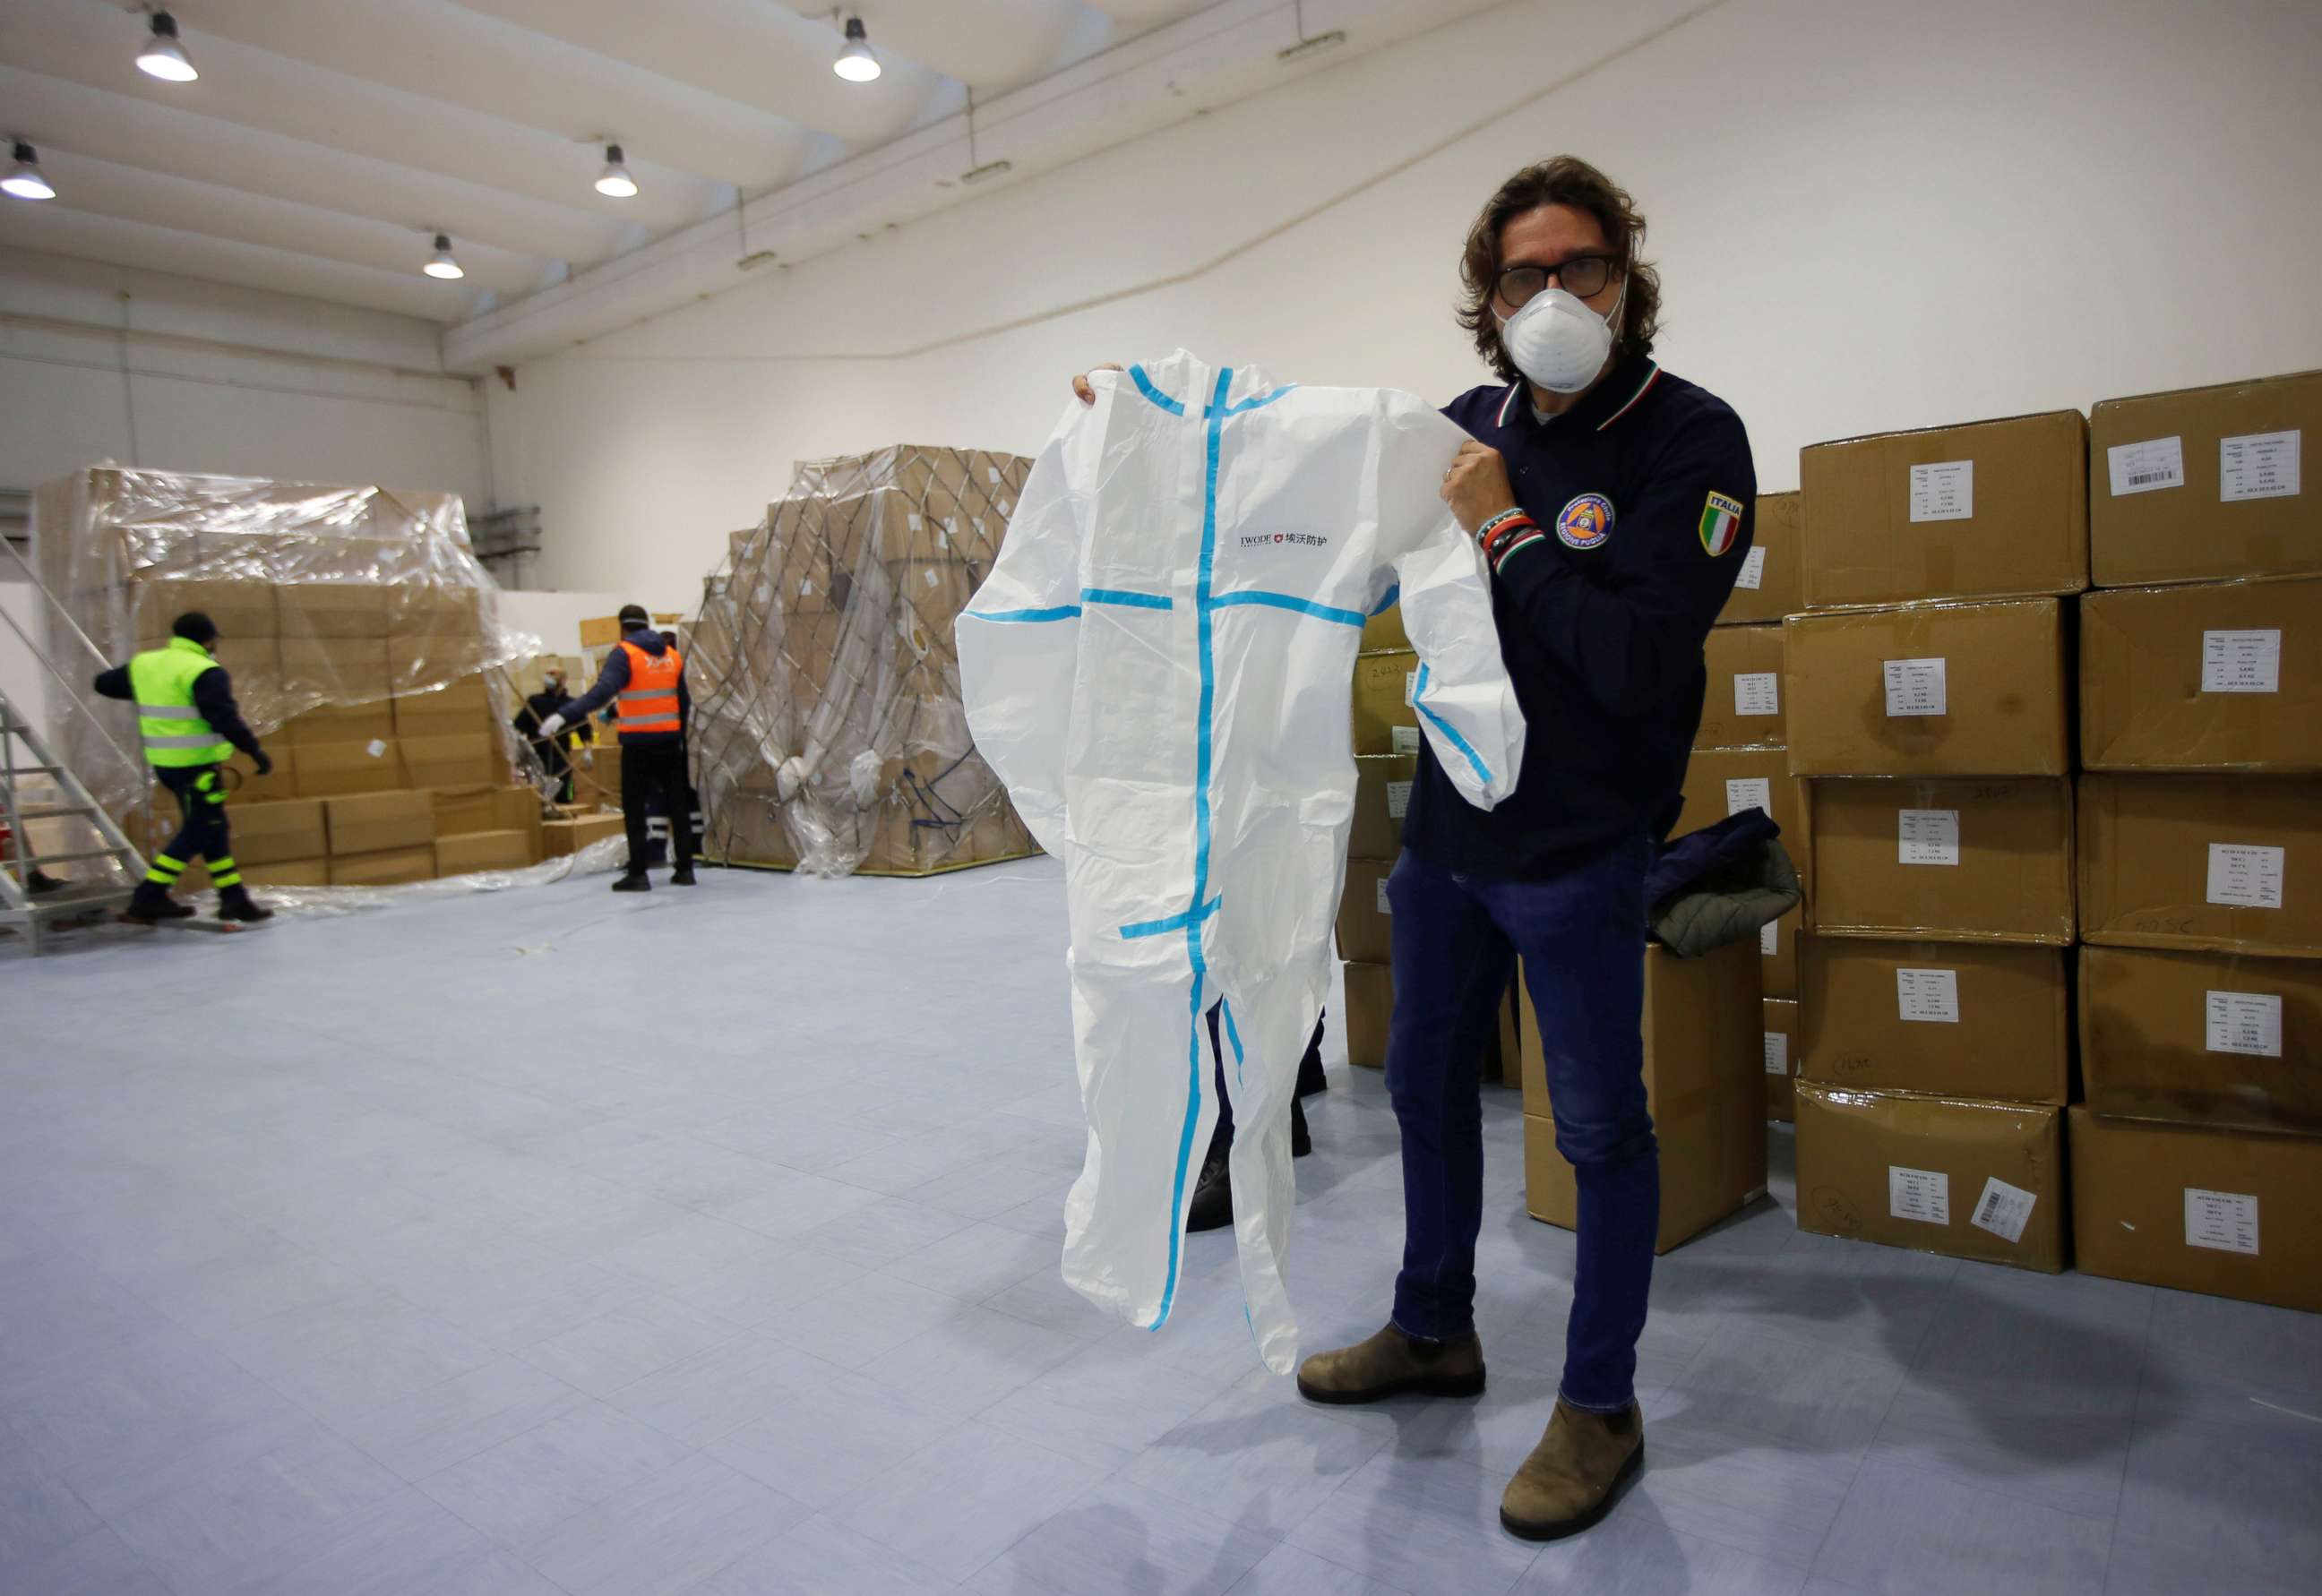 PHOTO: A member of the Italian Civil Protection shows a protective suit that came in a shipment containing supplies of personal protective equipment in Bari, Italy, April 7, 2020.